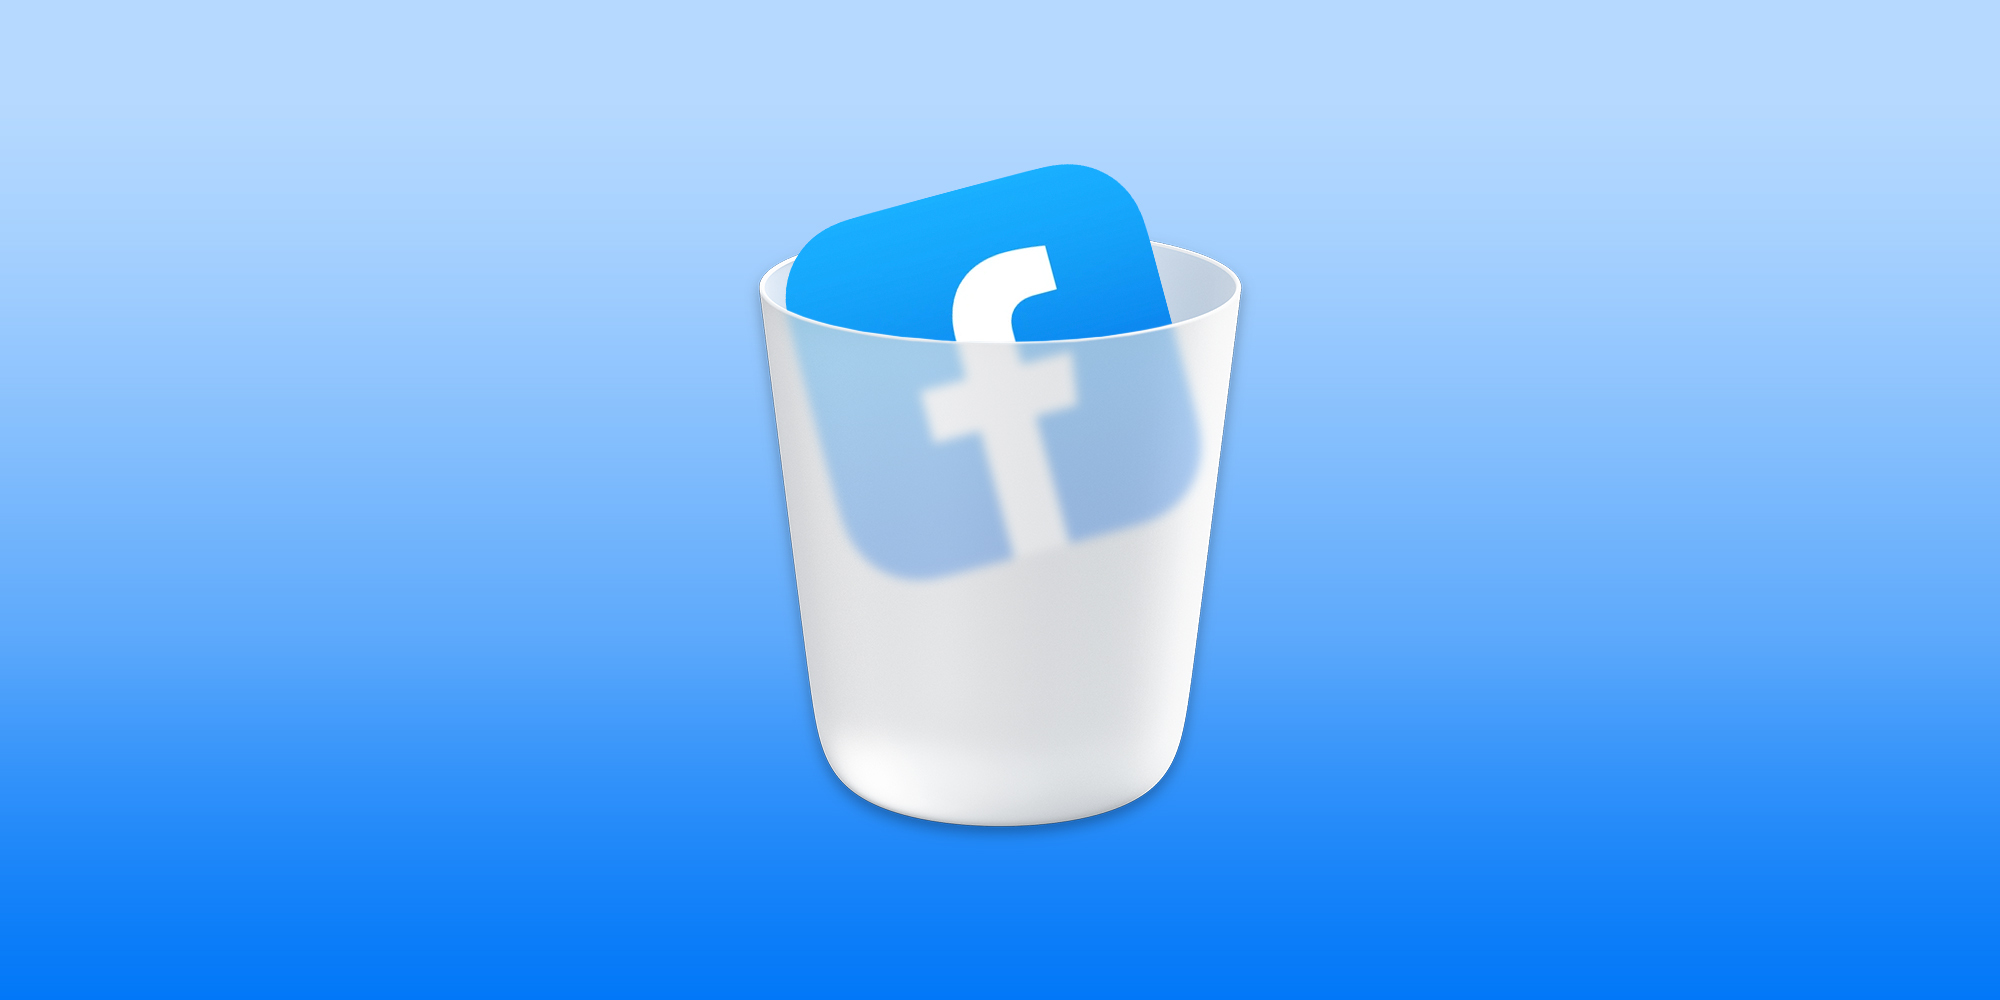 I can't login to my Facebook account on F… - Apple Community